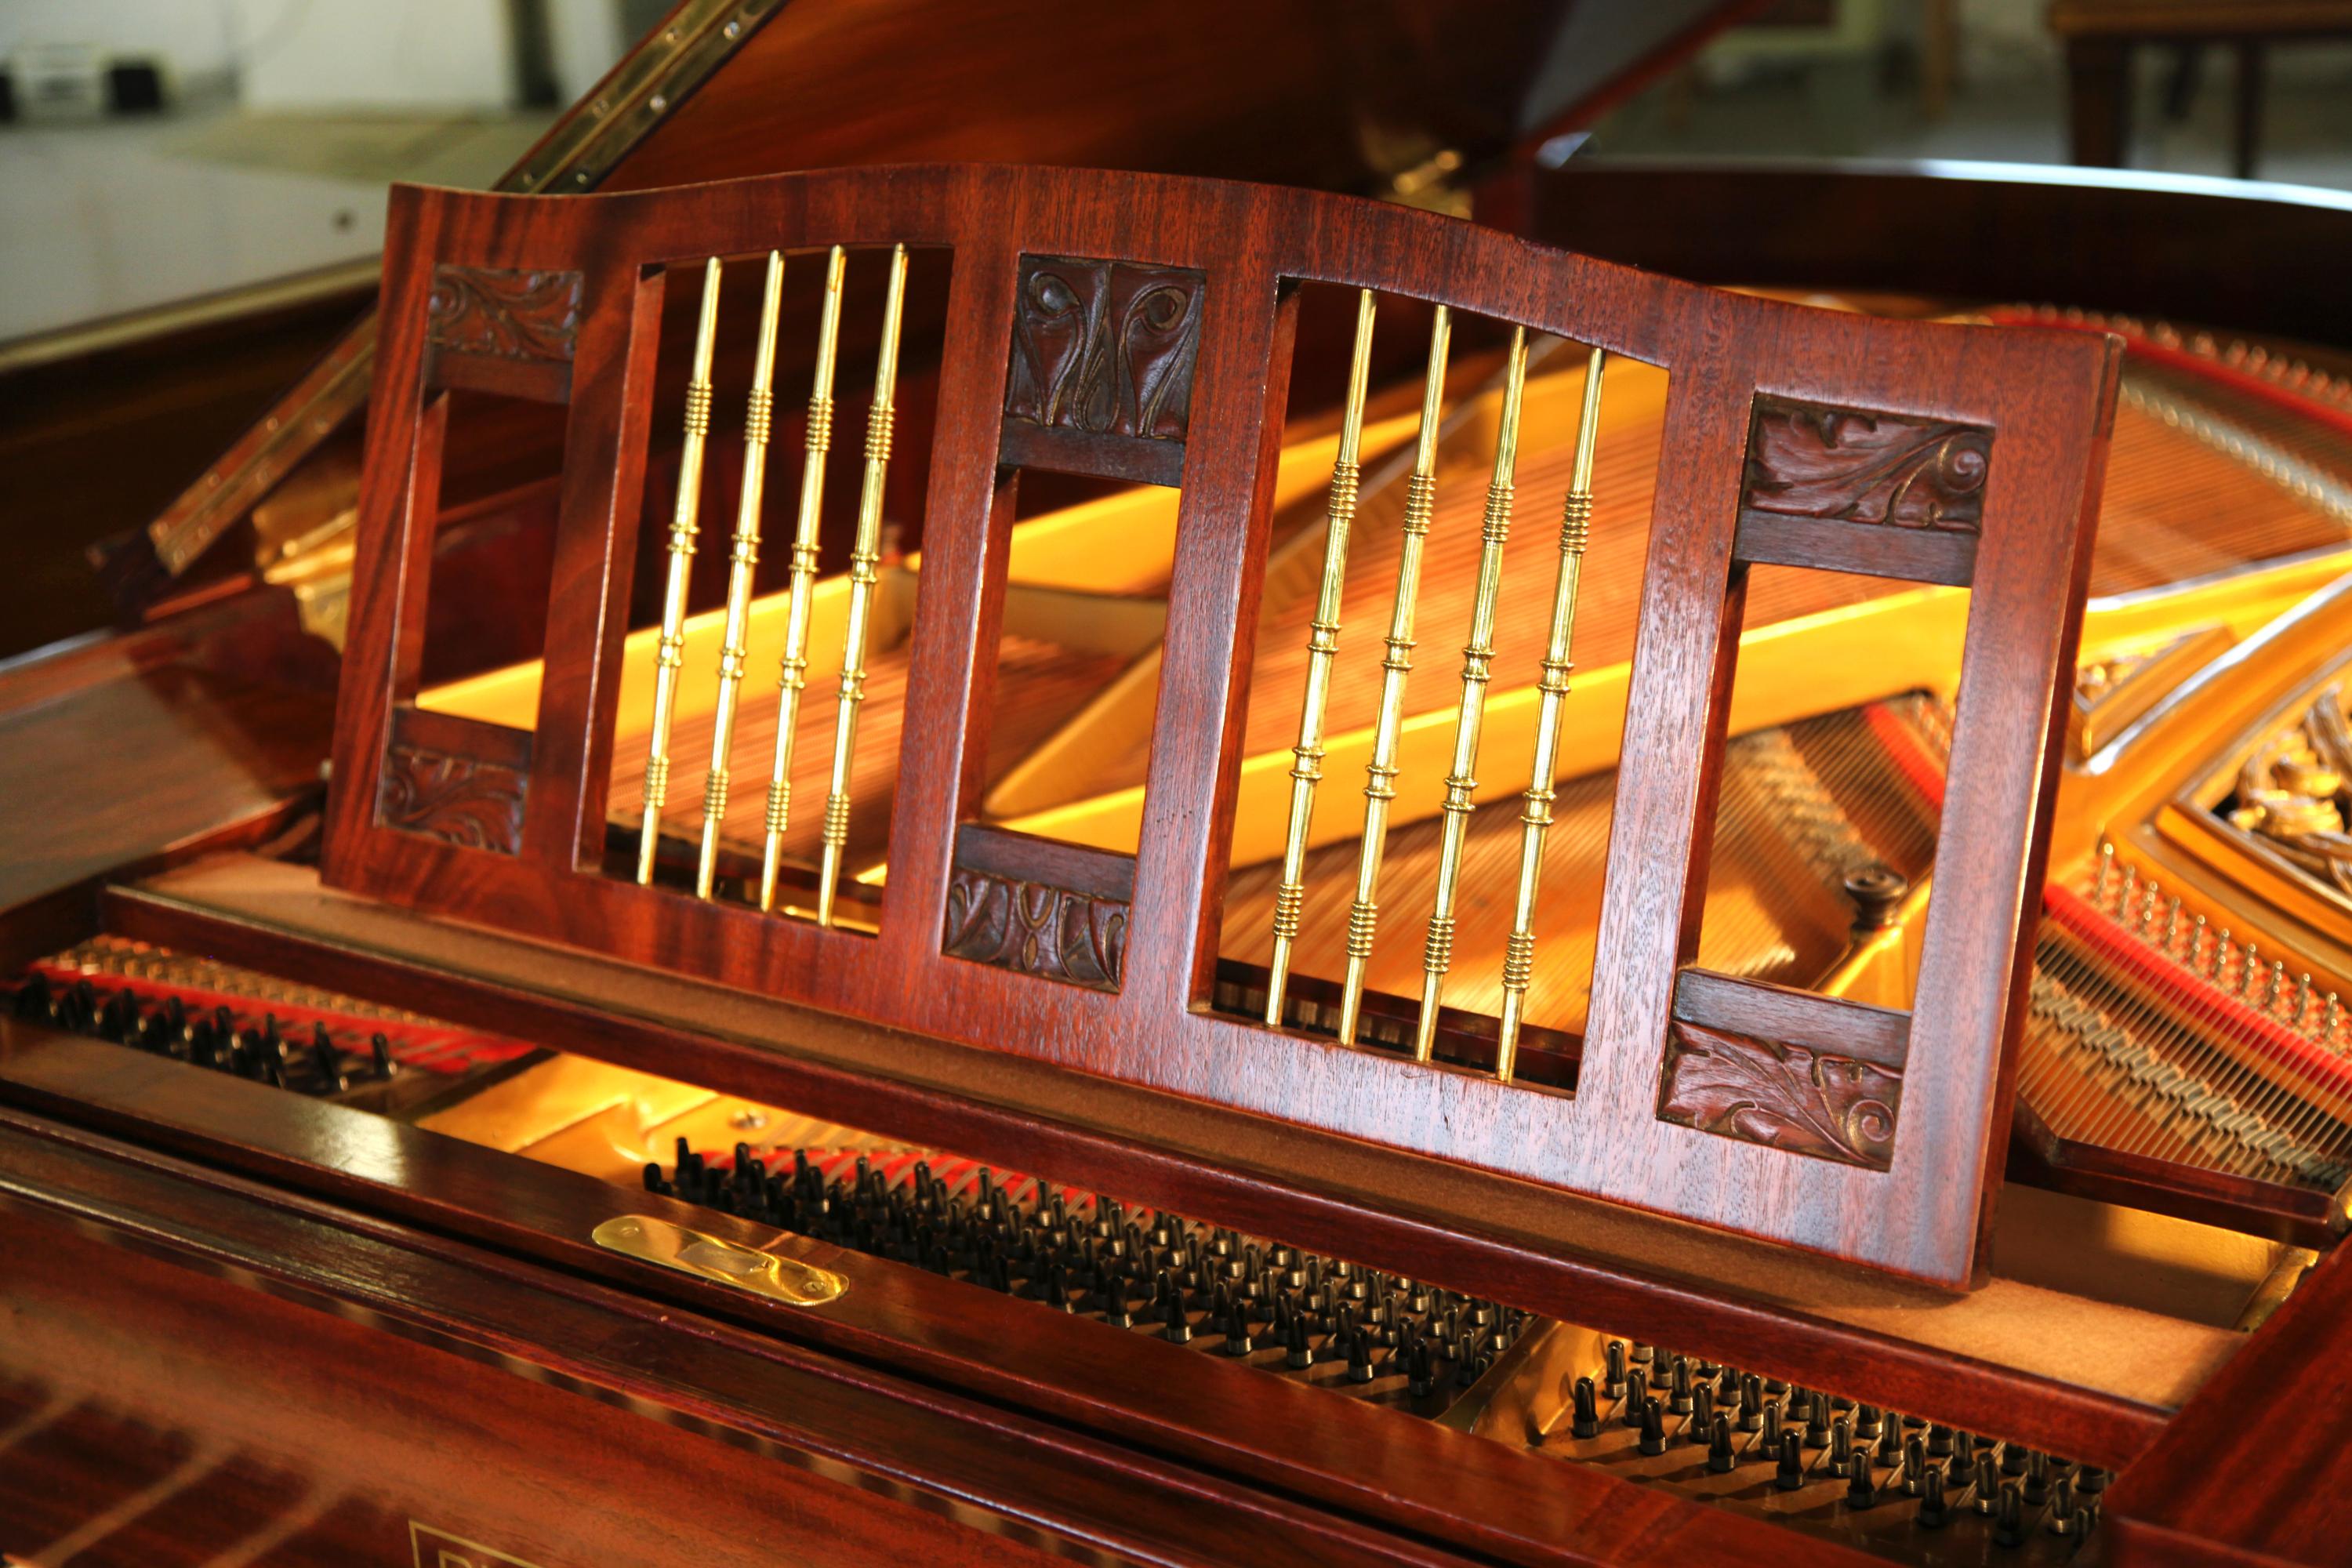 A 1916, German Arts and Crafts, Ibach grand piano with a mahogany case and carved panel detail. The mahogany cabinet is polished so as to emphasize the quality of the wood used. The minimal rectangular lyre has two rectangular uprights separated by